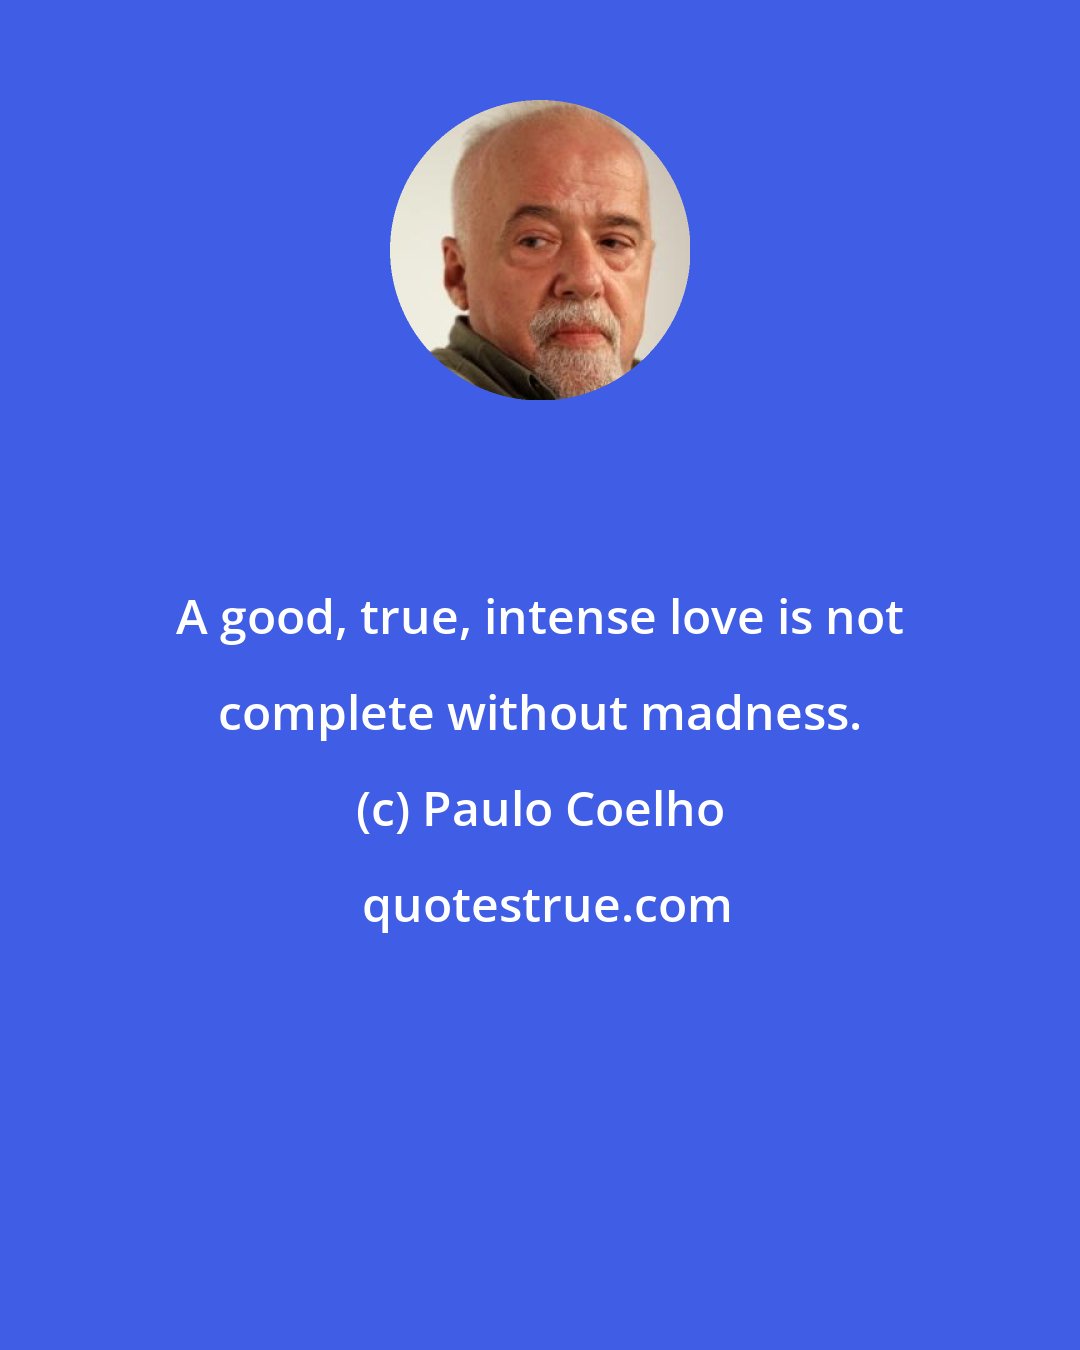 Paulo Coelho: A good, true, intense love is not complete without madness.